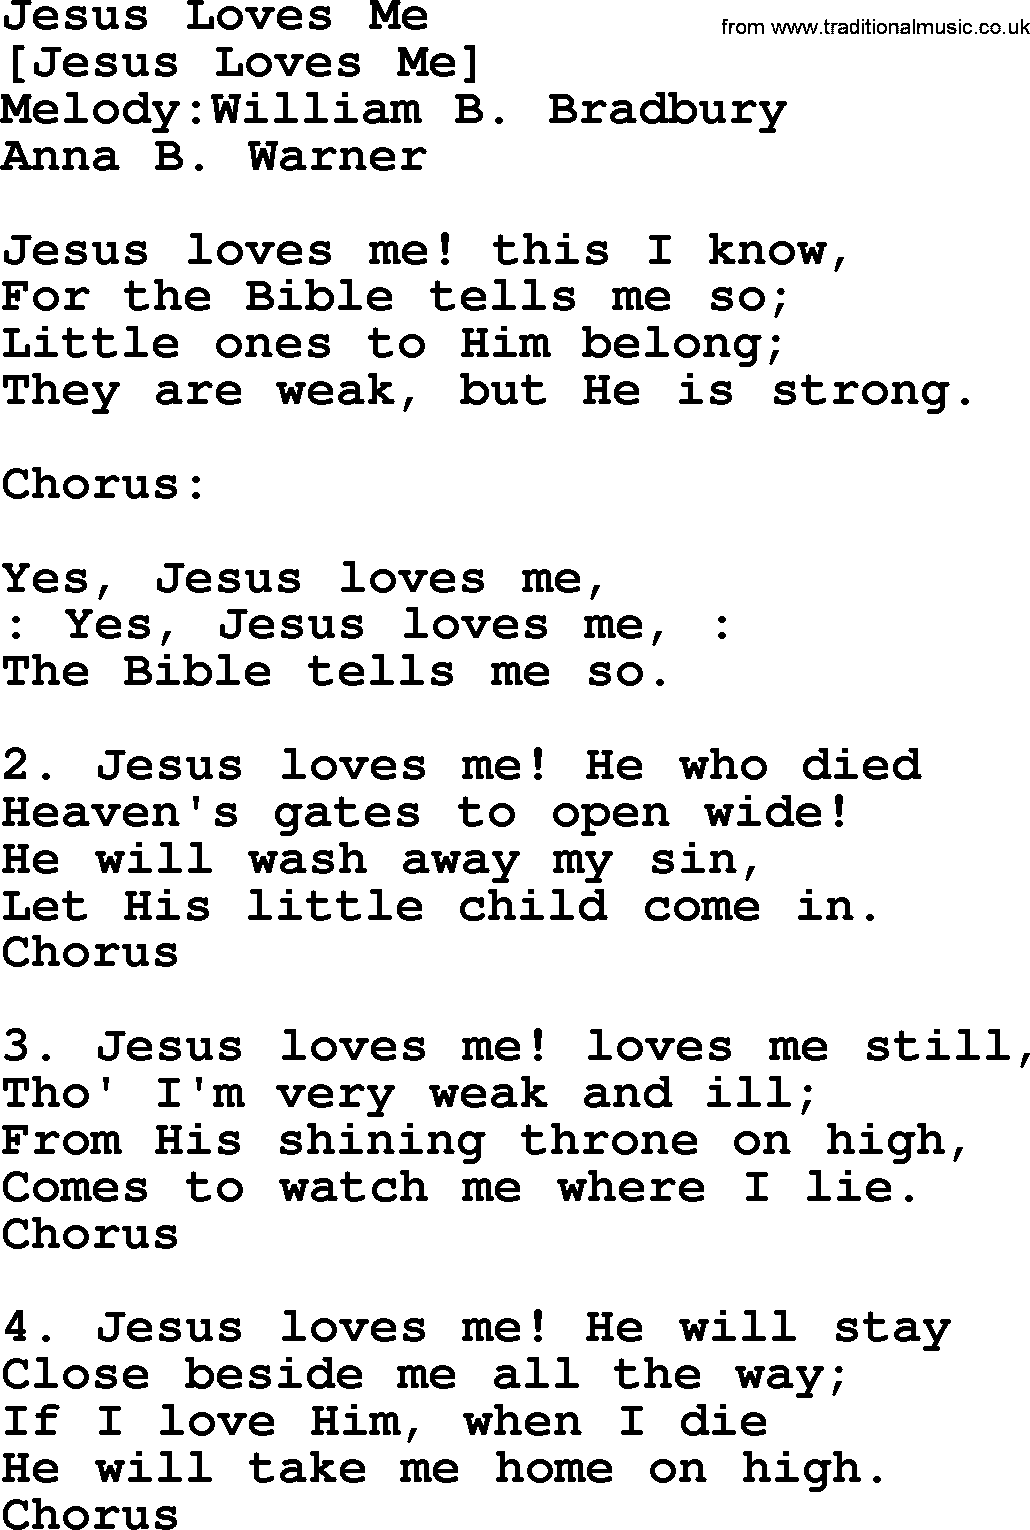 old-english-song-lyrics-for-jesus-loves-me-with-pdf